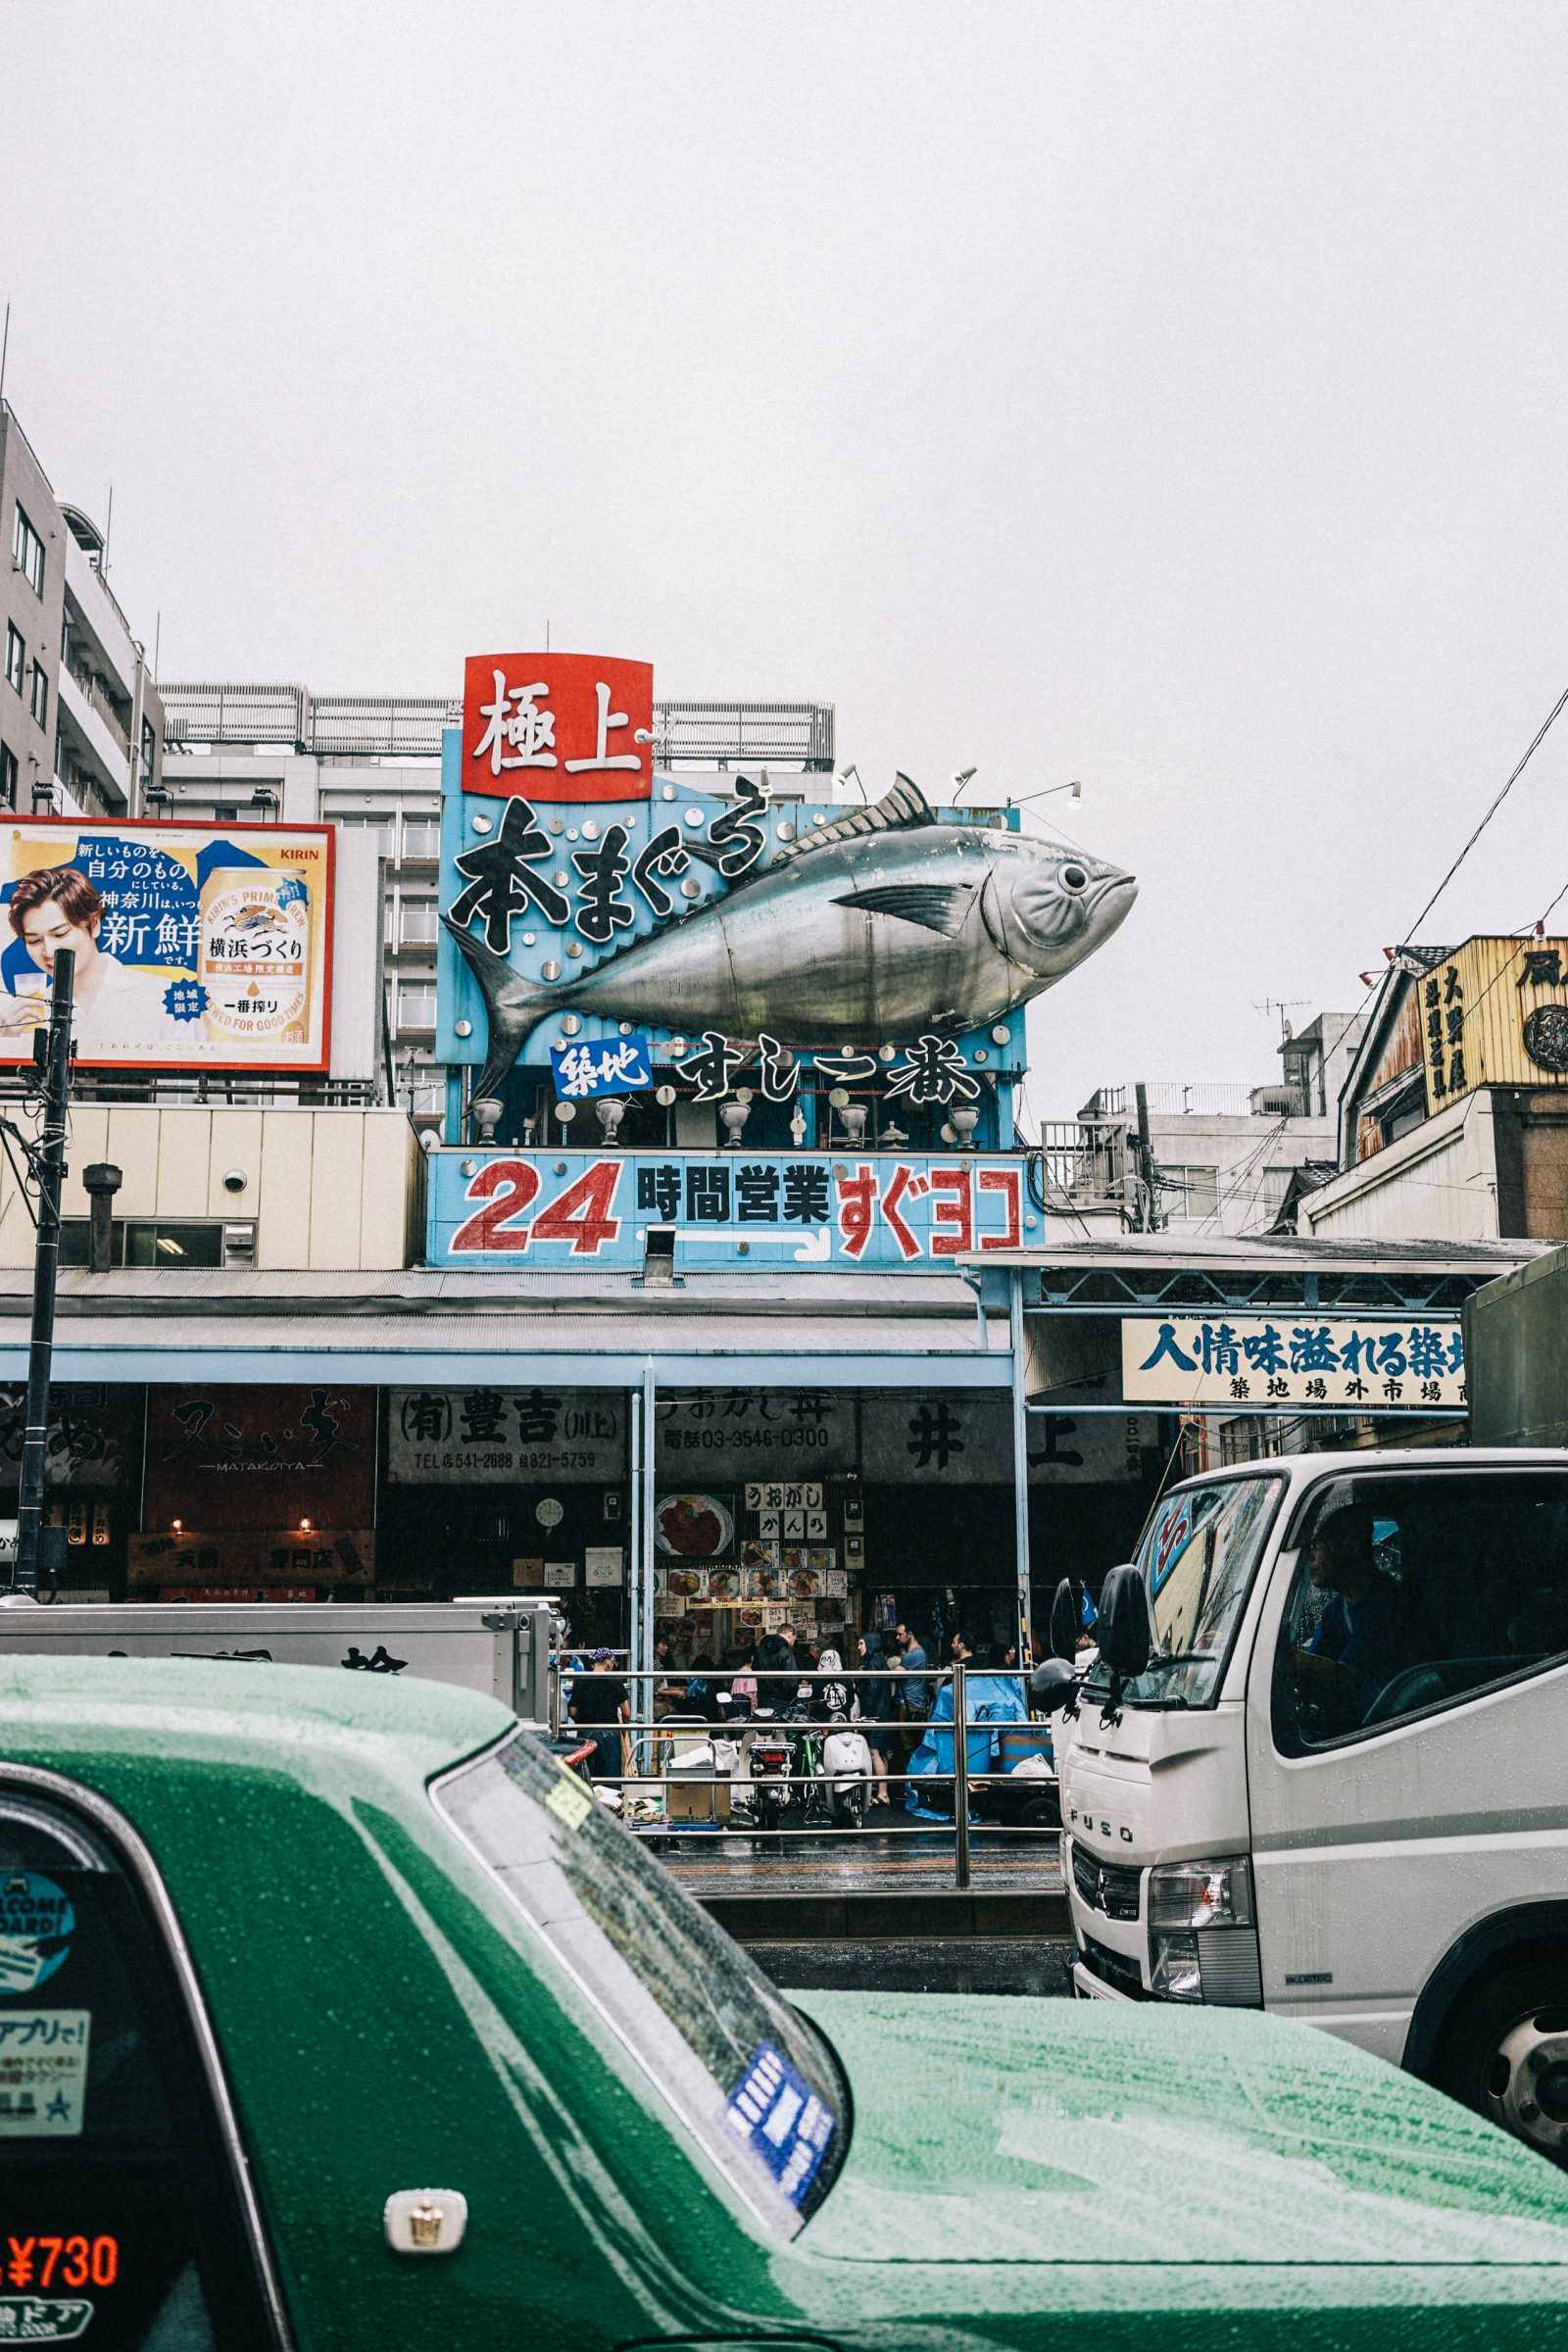 Tokyo_Travel_Guide-Fish_Market-Harajuku-Levis_Denim_Skirt-Off_The_Shoulders_Top-YSL_Sneakers-Outfit-Collage_Vintage-Street_Style-12